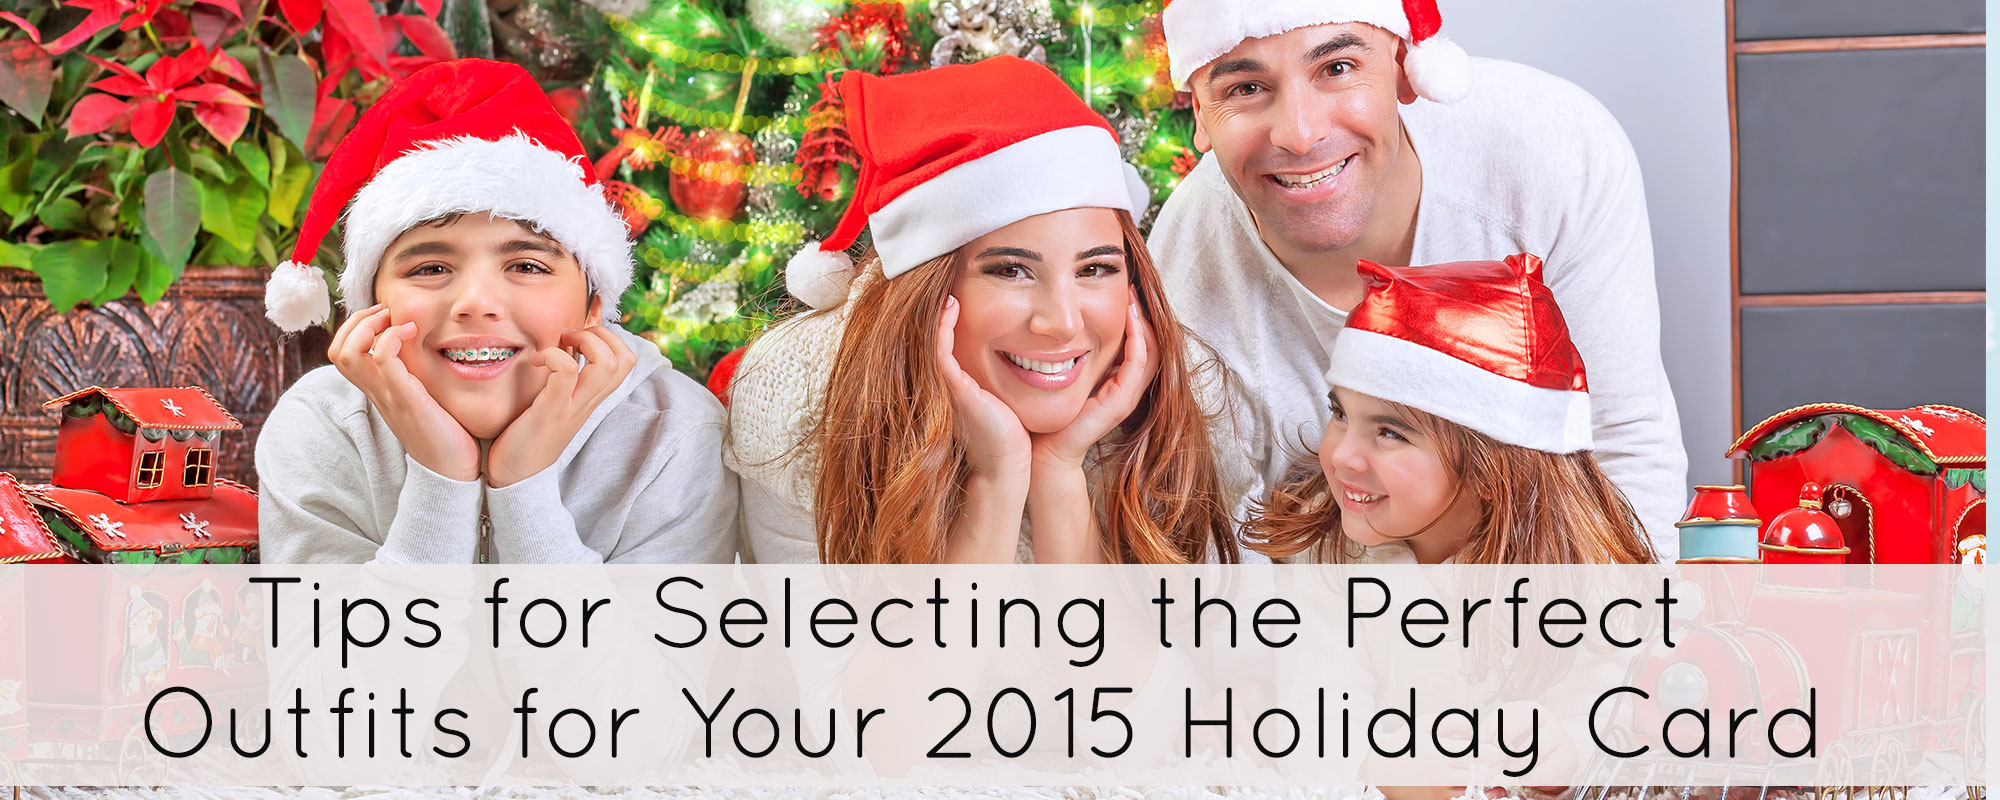 4 Important Tips for Selecting the Perfect Outfits for Your 2015 Holiday Card